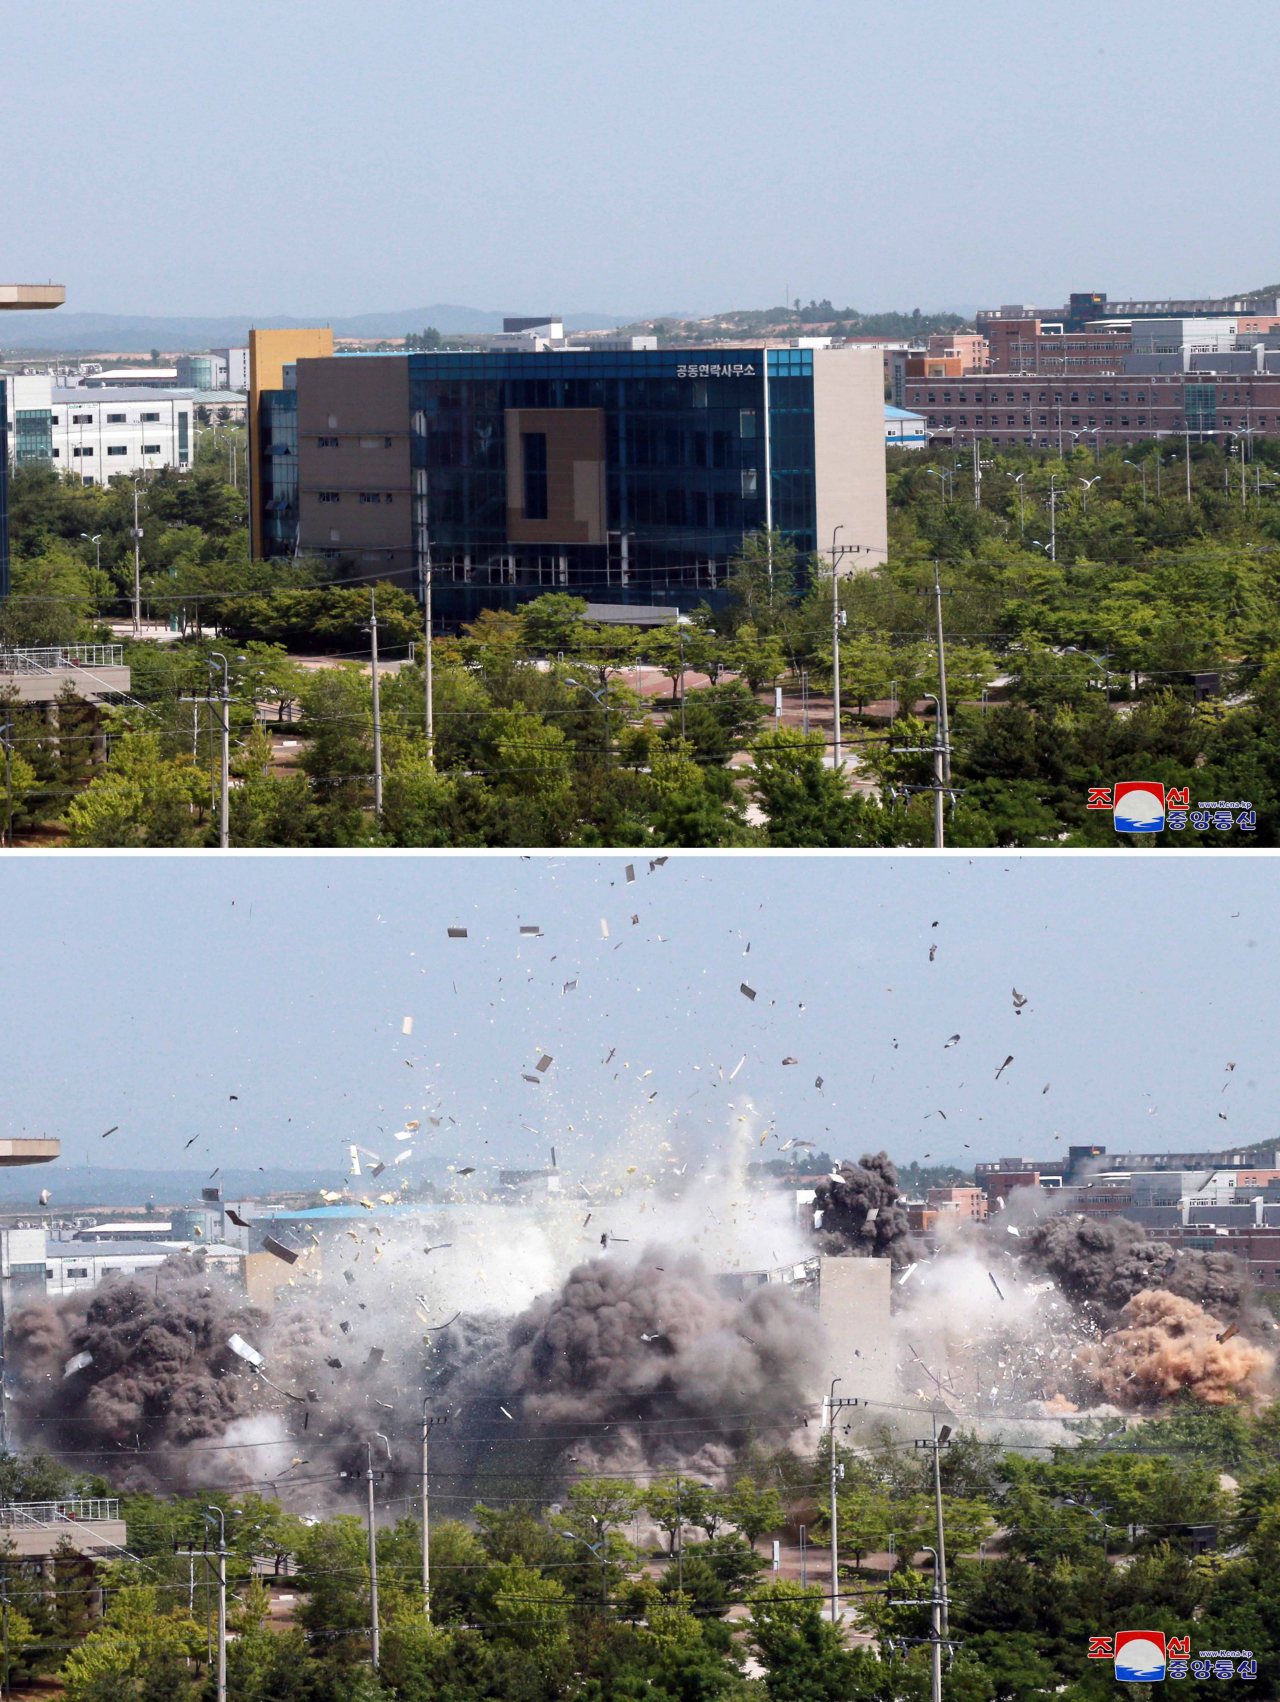 A set of images provided by North Korea's state-run Korean Central News Agency in June 2020 shows North Korea's demolition of an inter-Korean liaison office in the country's border town of Kaesong. (Yonhap)